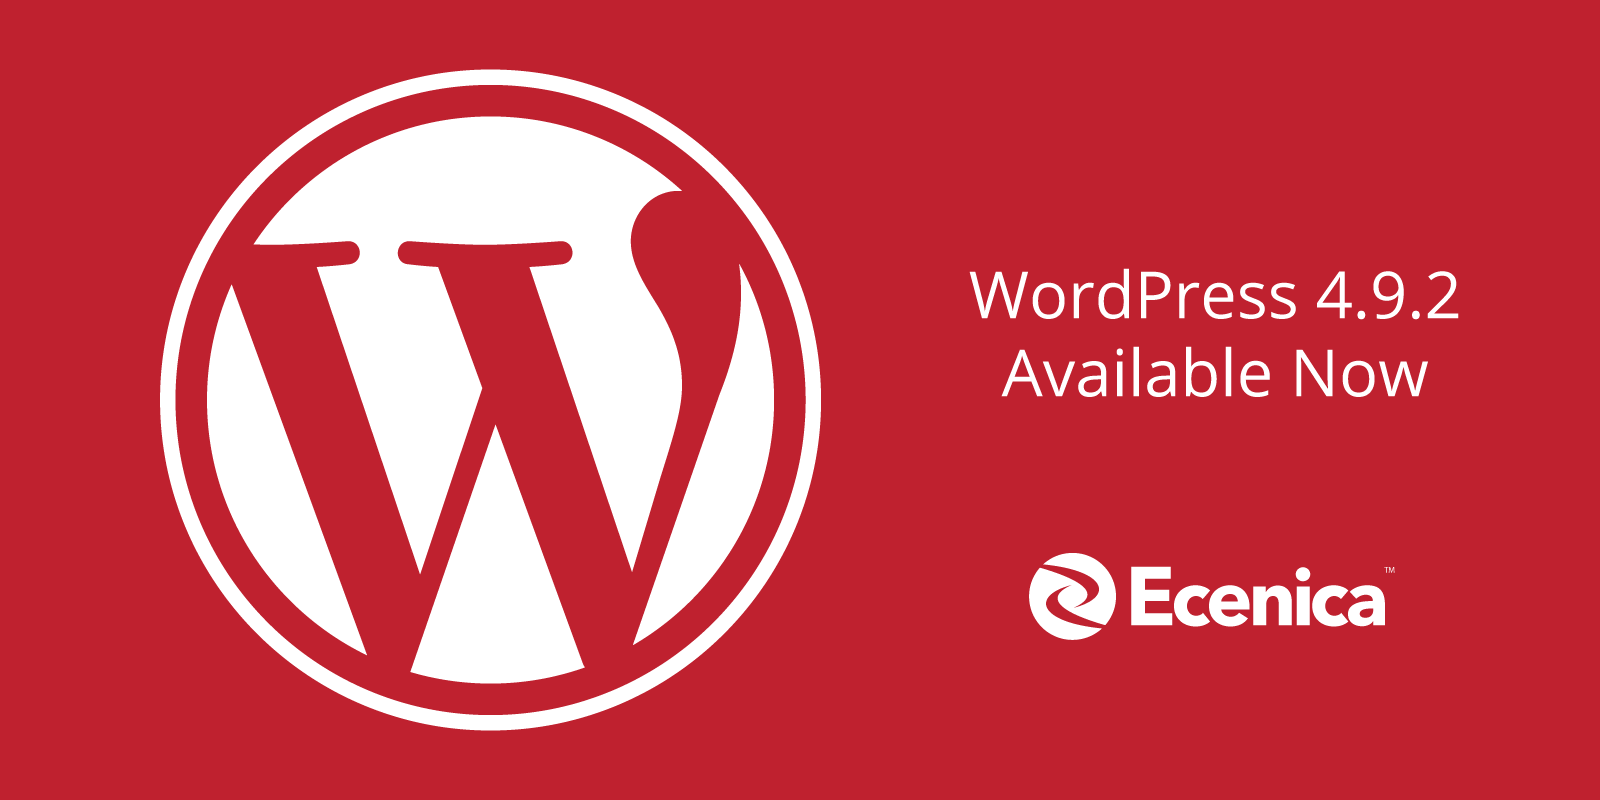 WordPress 4.9.2 now available at Ecenica